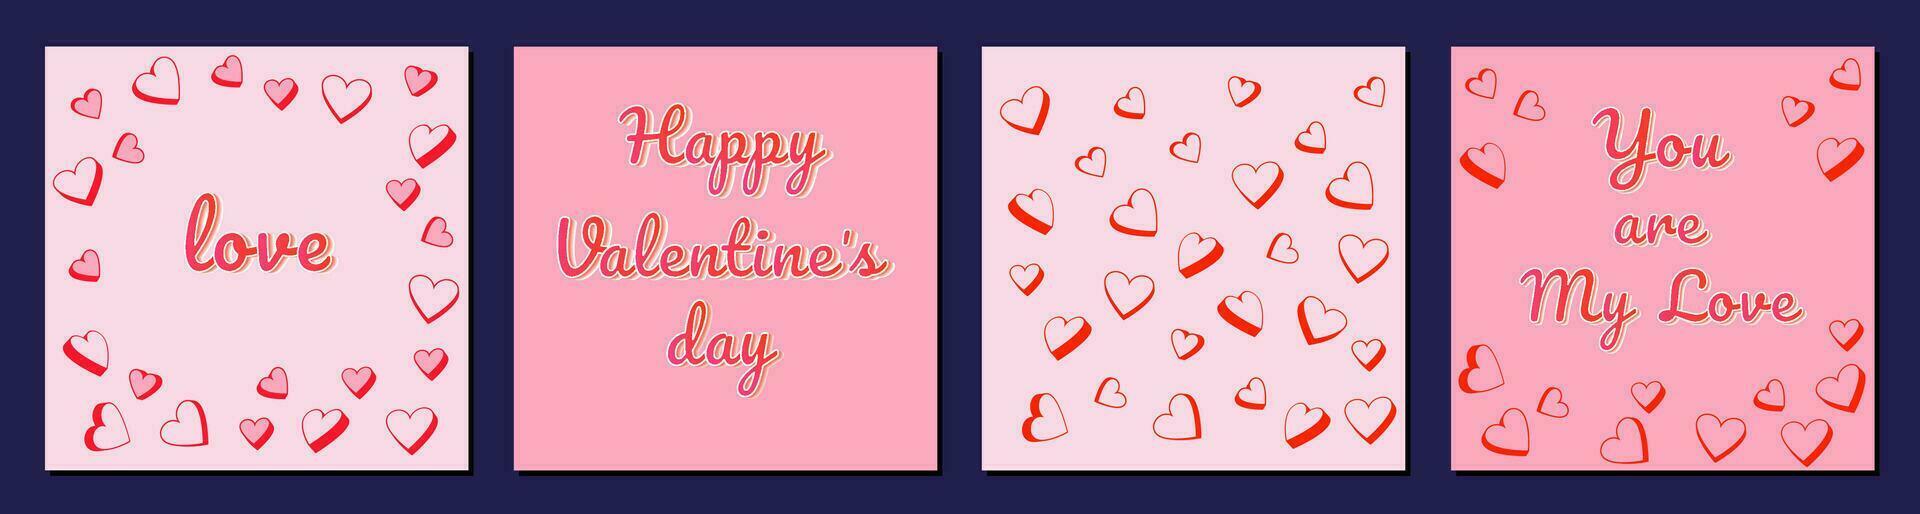 Poster Happy Valentines Day. Lettering you are my love. Set of festive vector templates with hearts. Vector illustrations of printing, corporate invitation, greeting cards.